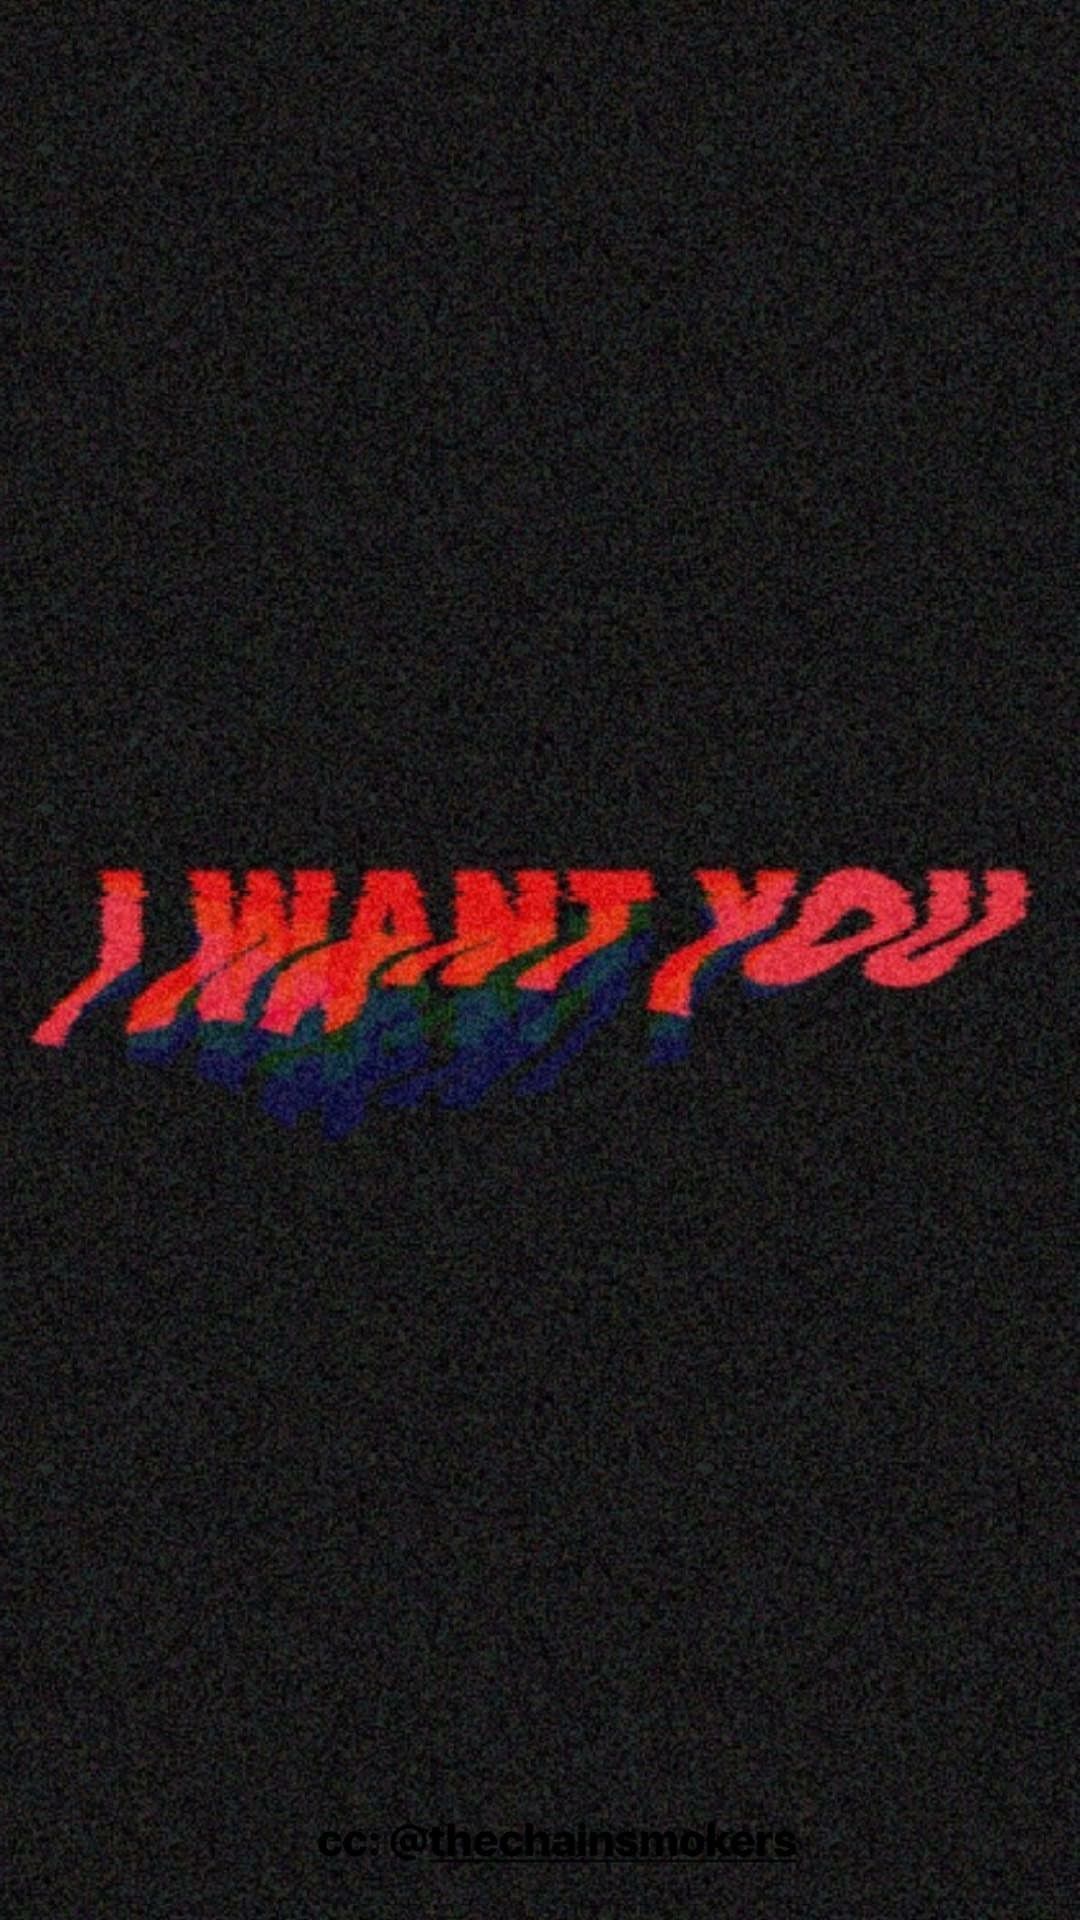 IPhone wallpaper of I want you by The Chainsmokers - 90s